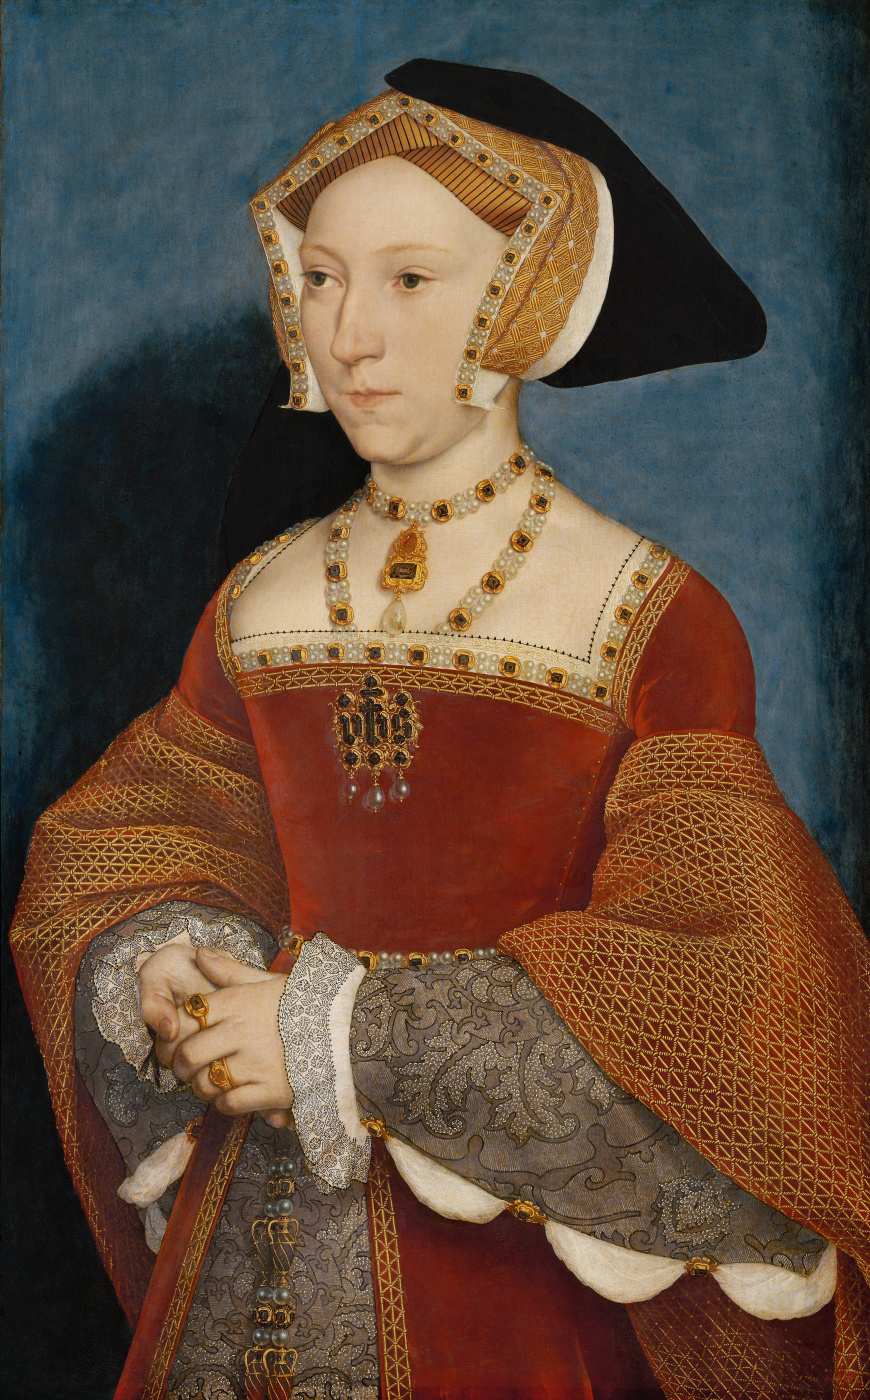 Hans Holbein the Younger. Portrait of Jane Seymour, Queen of England